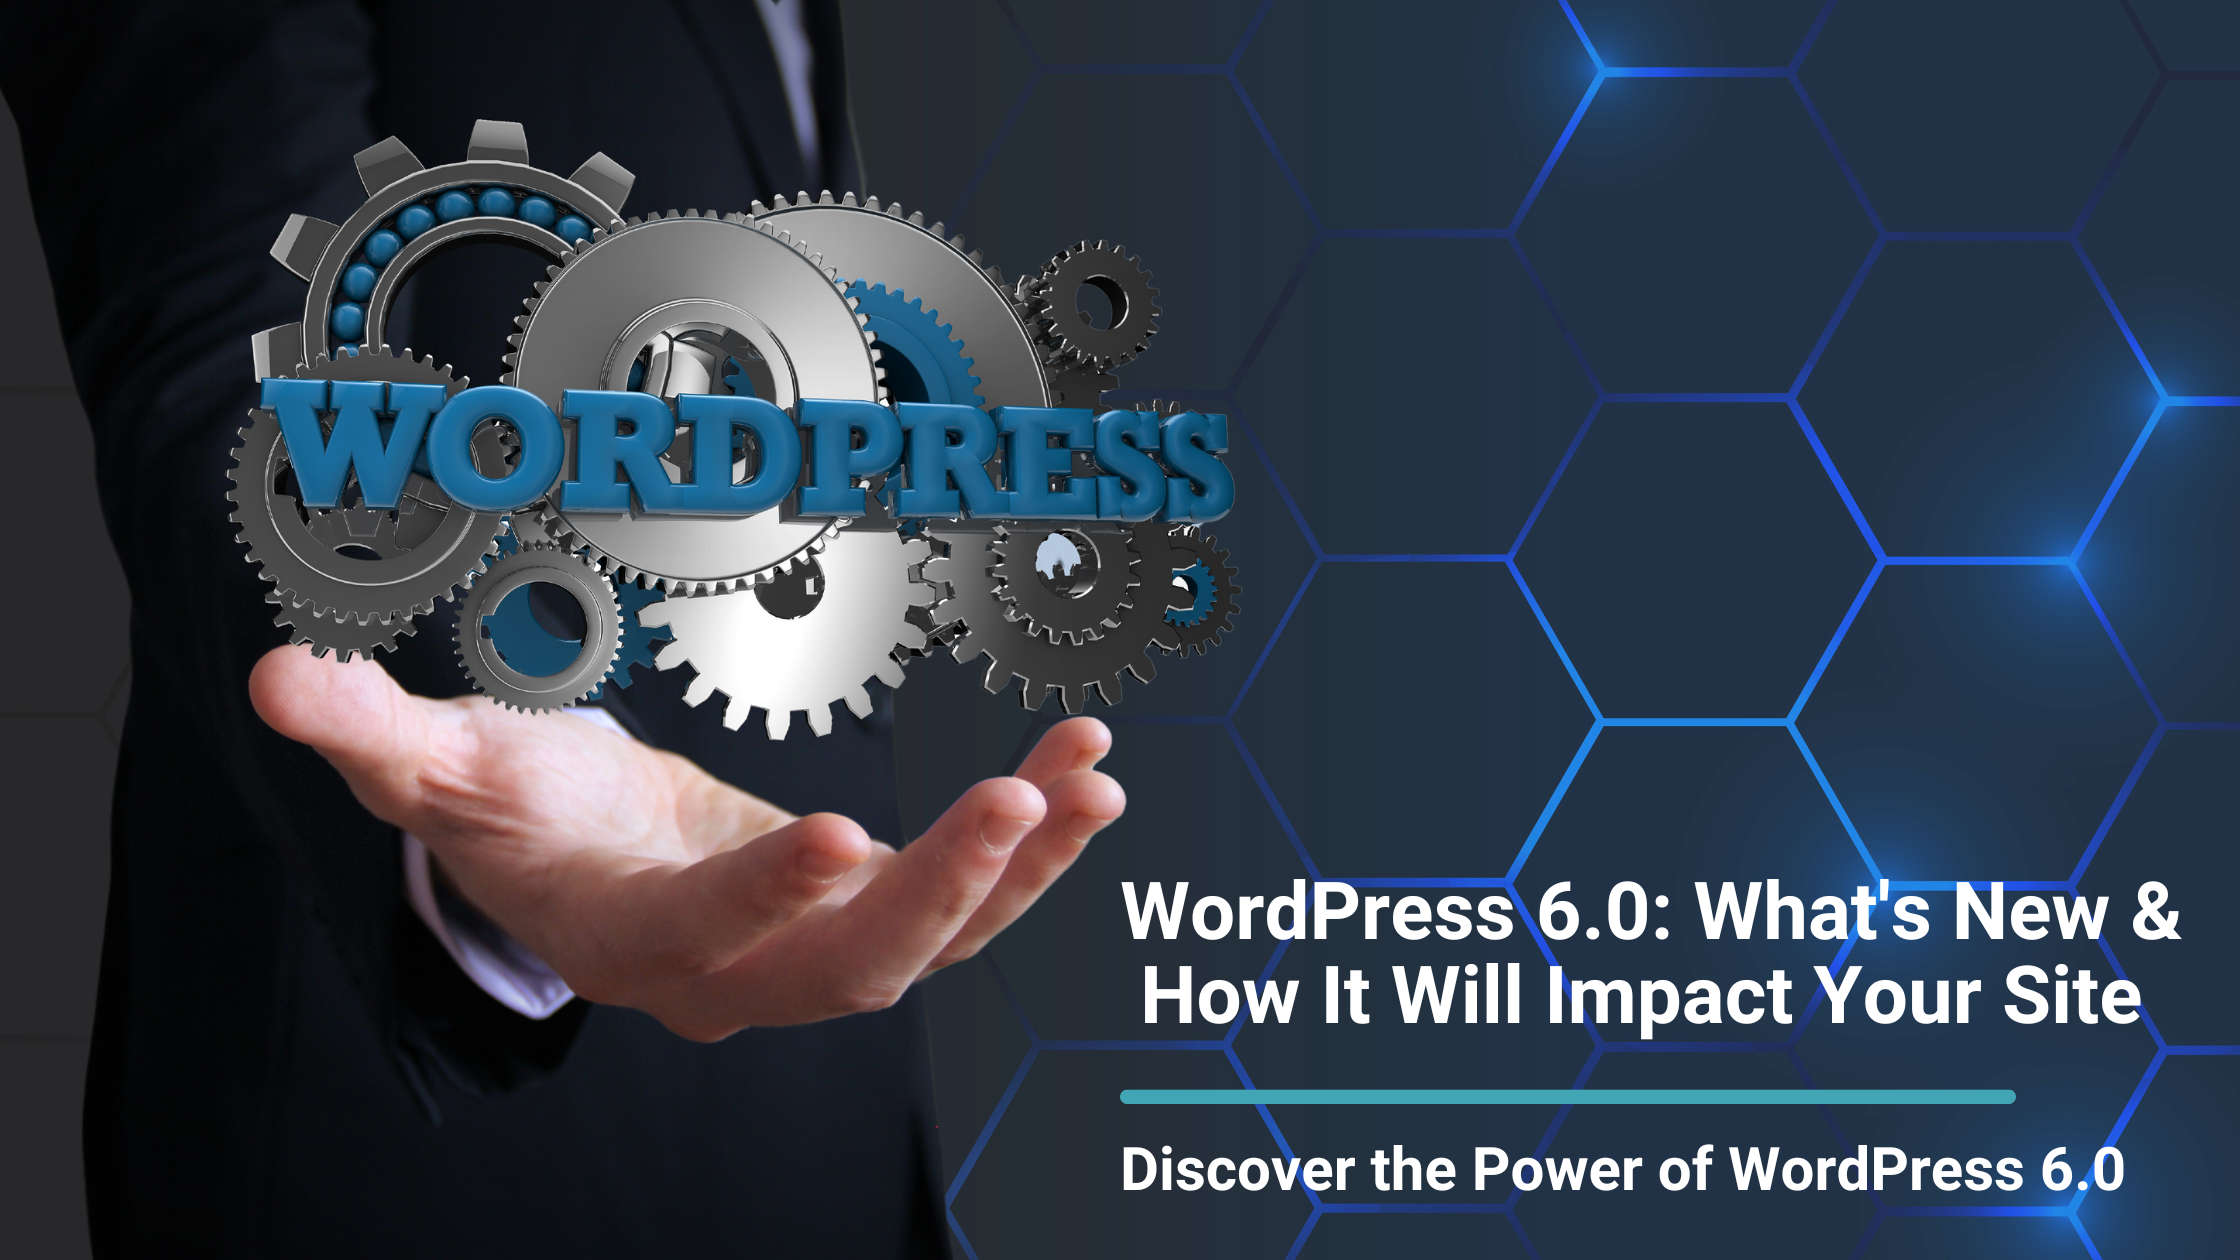 WordPress 6.0: What's New and How It Will Impact Your Site